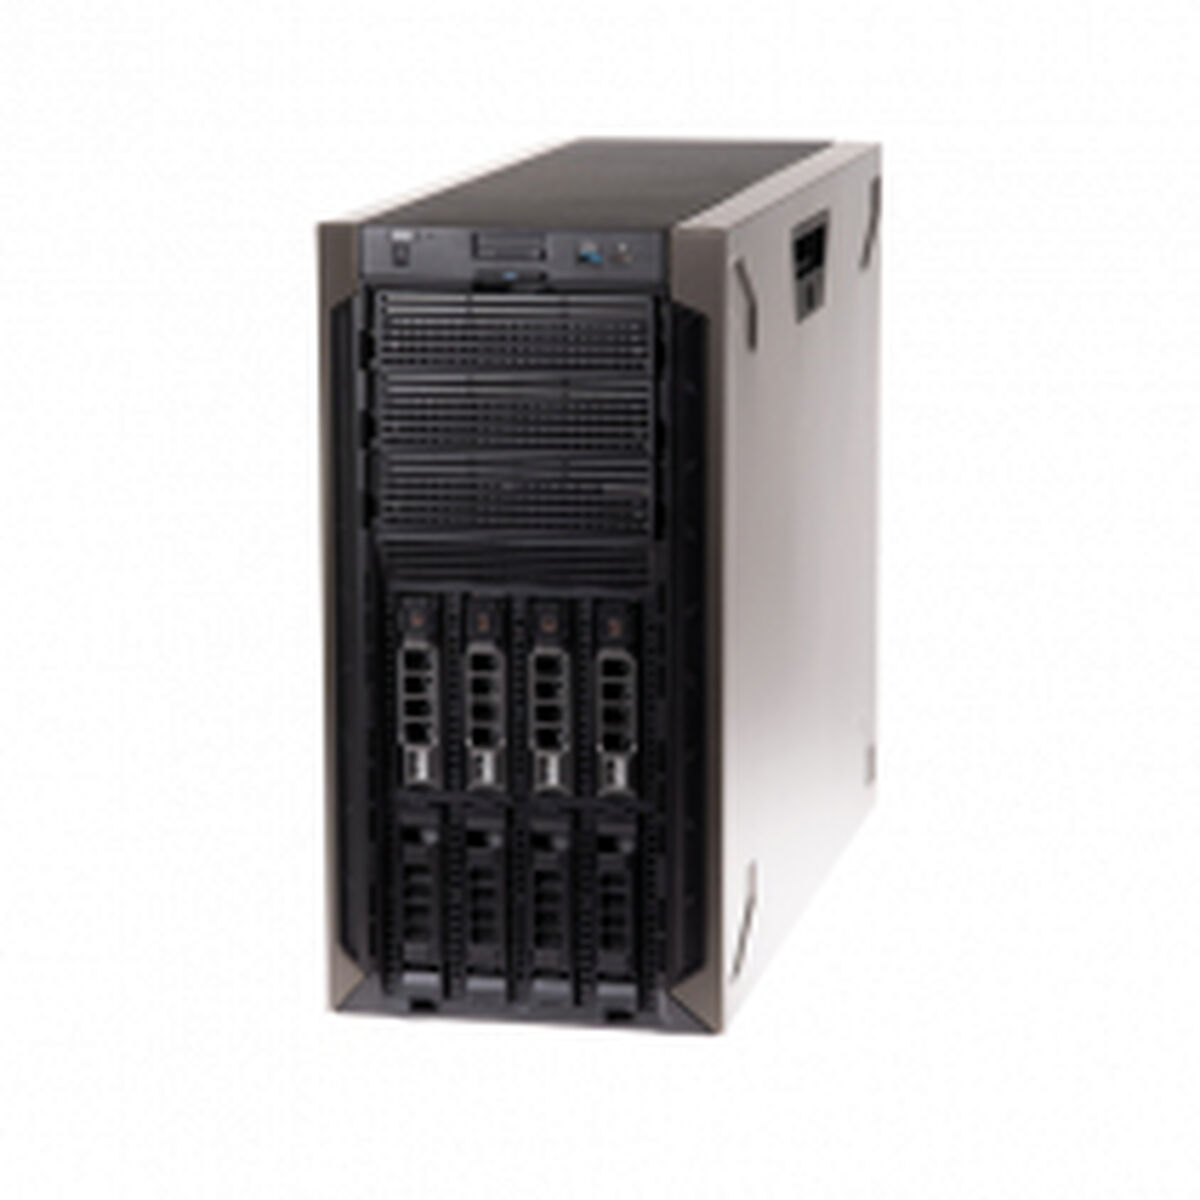 Axis-Server AXIS S1132 32 TB